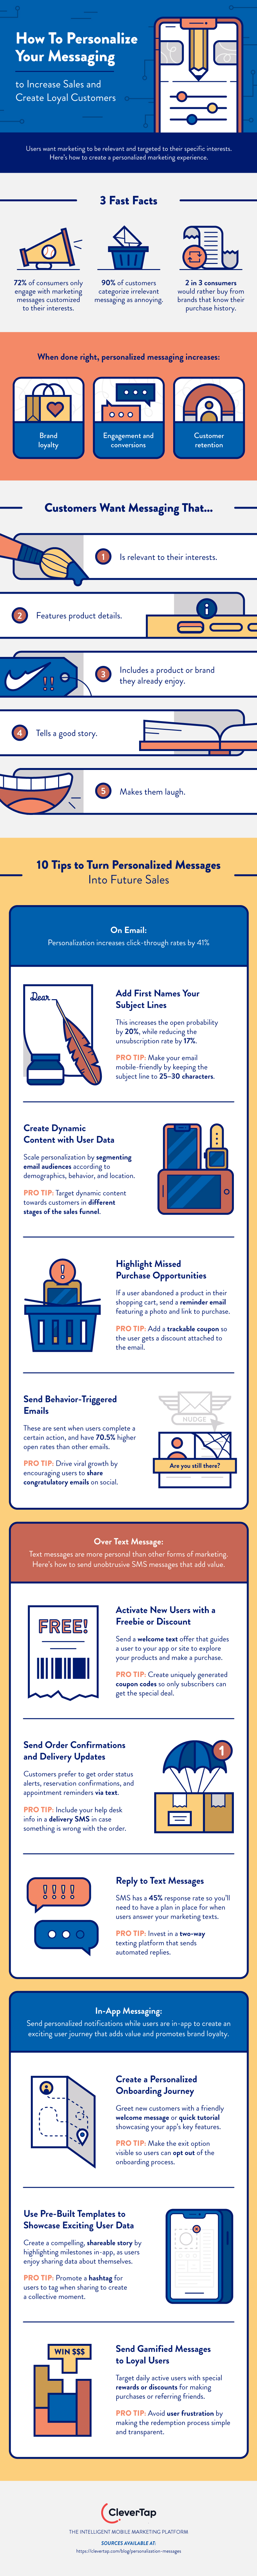 10 ways to personalize your marketing messaging to create loyal customers infographic